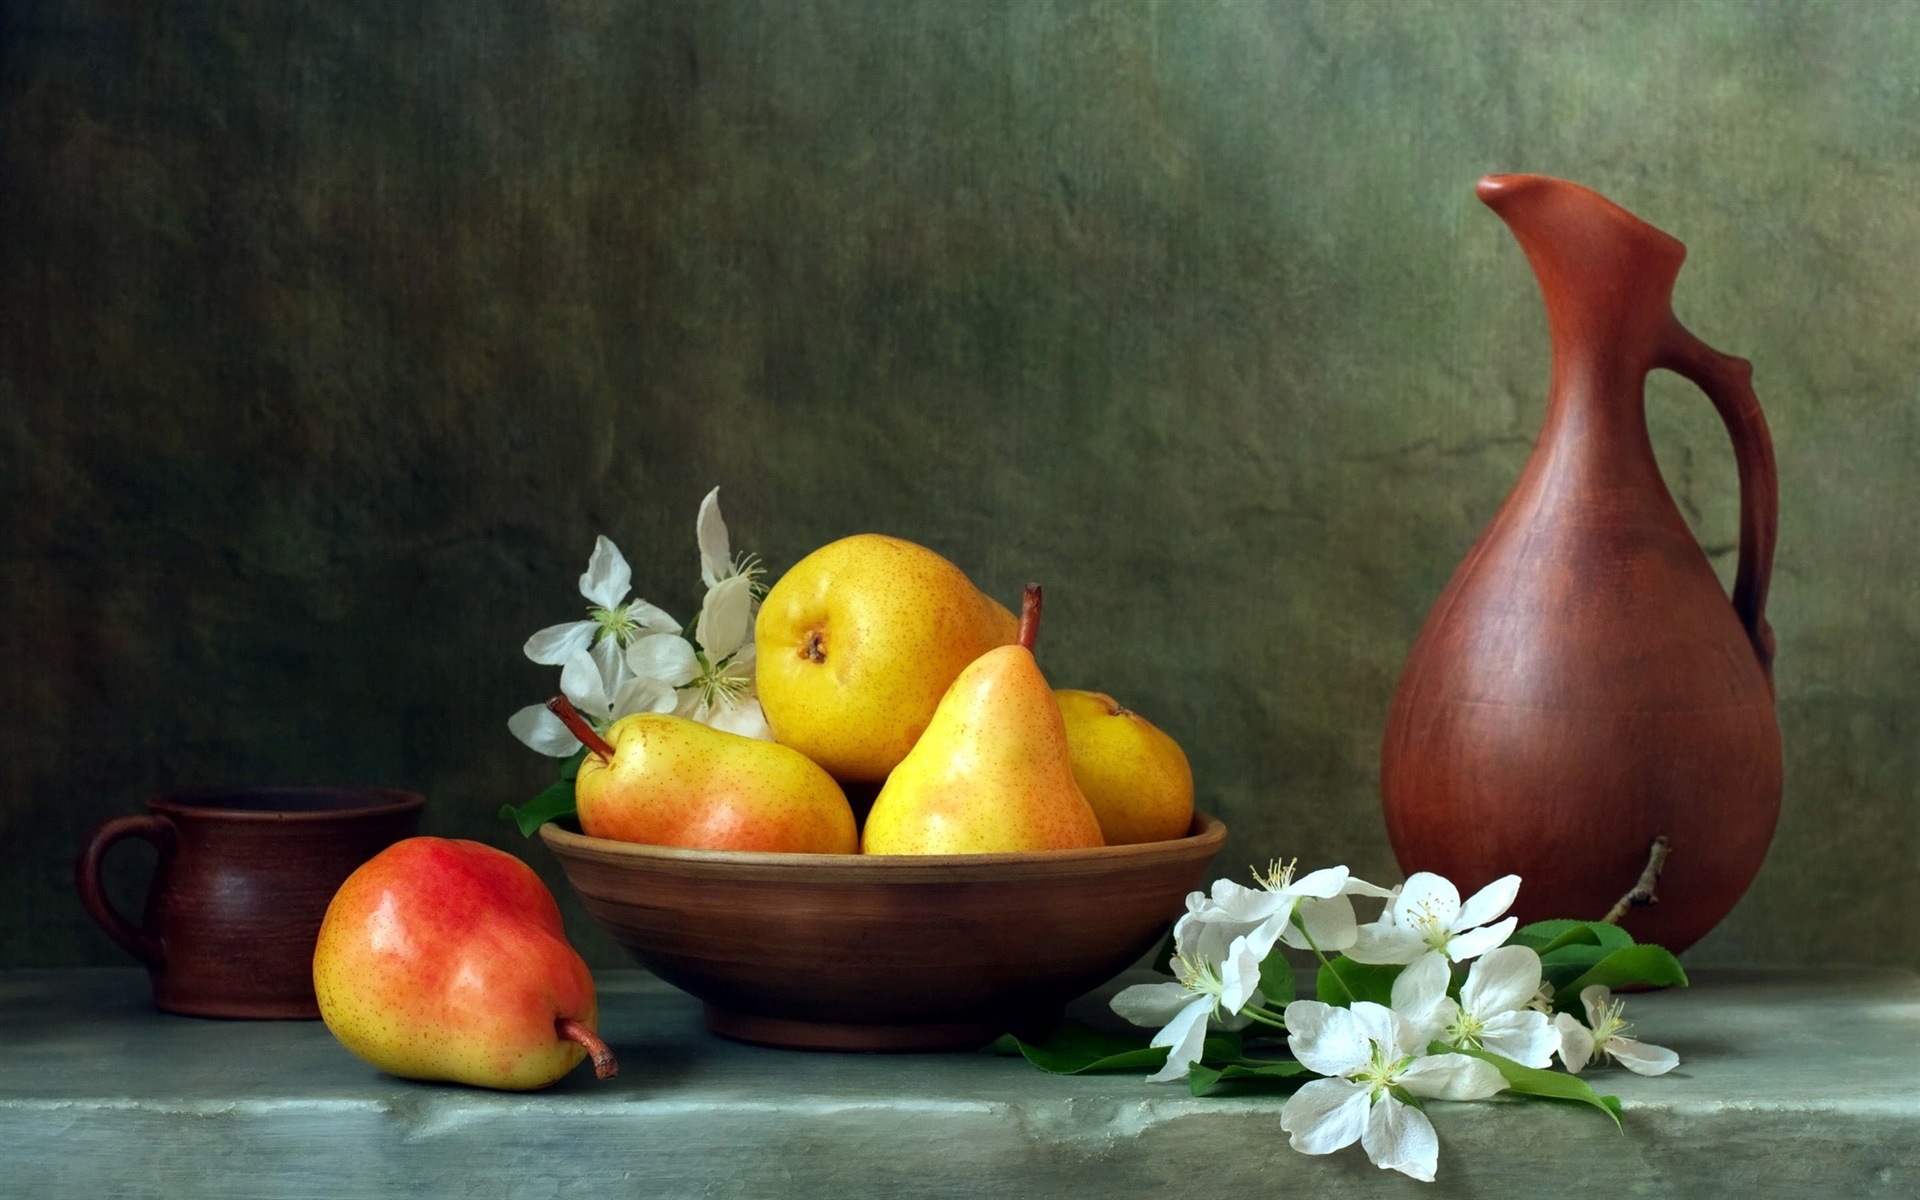 pear, photography, still life, bowl, cup, flower, pitcher